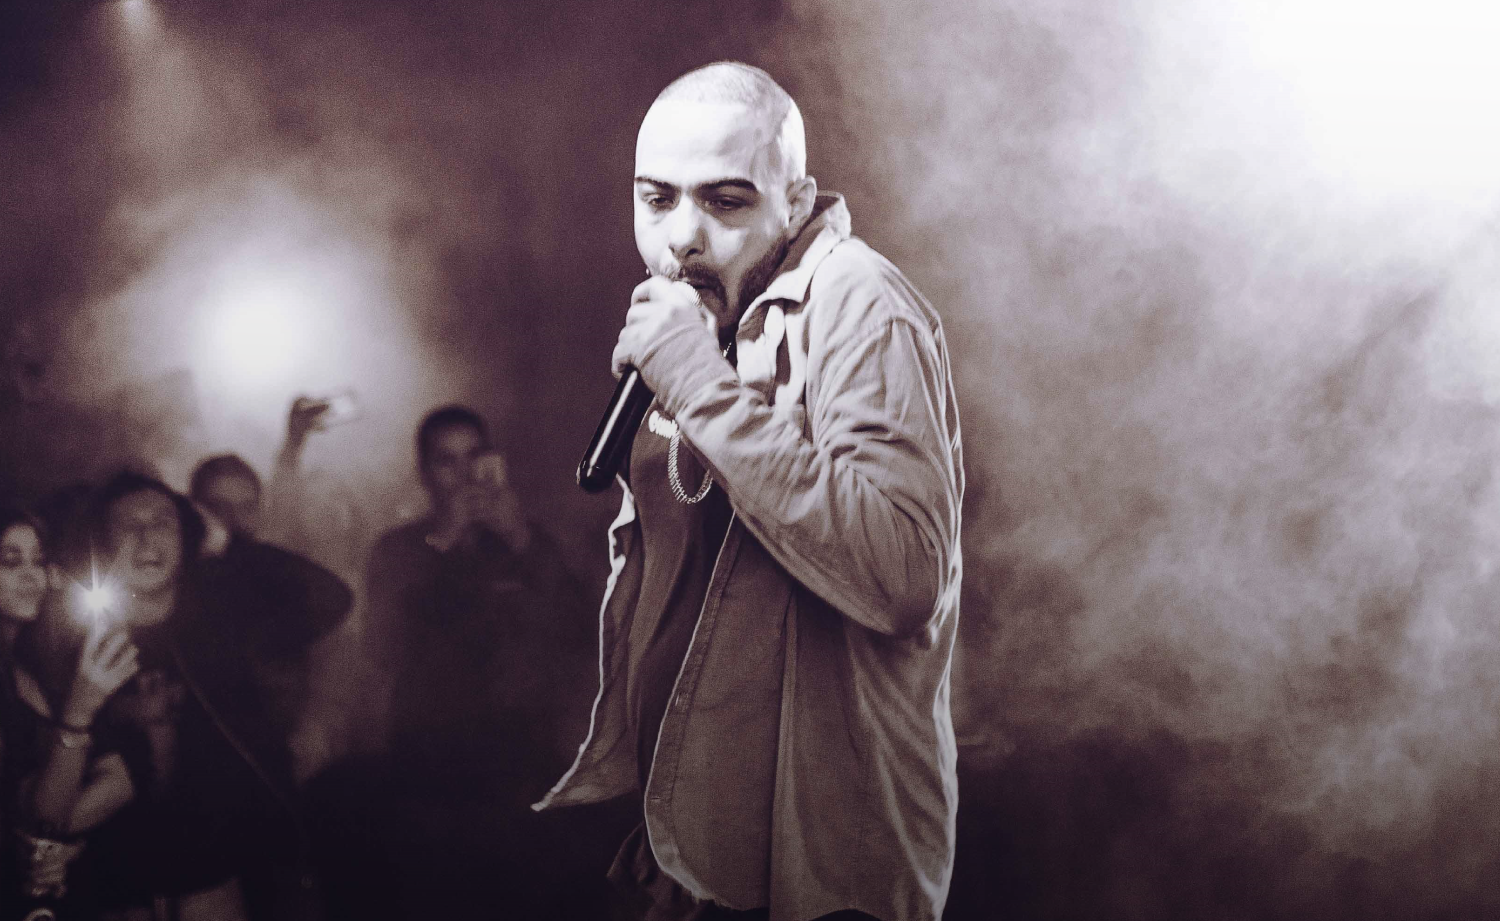 Egyptian Rapper Abyusif Releases Another Broody, Introspective Track from Upcoming Album 'Makeena'